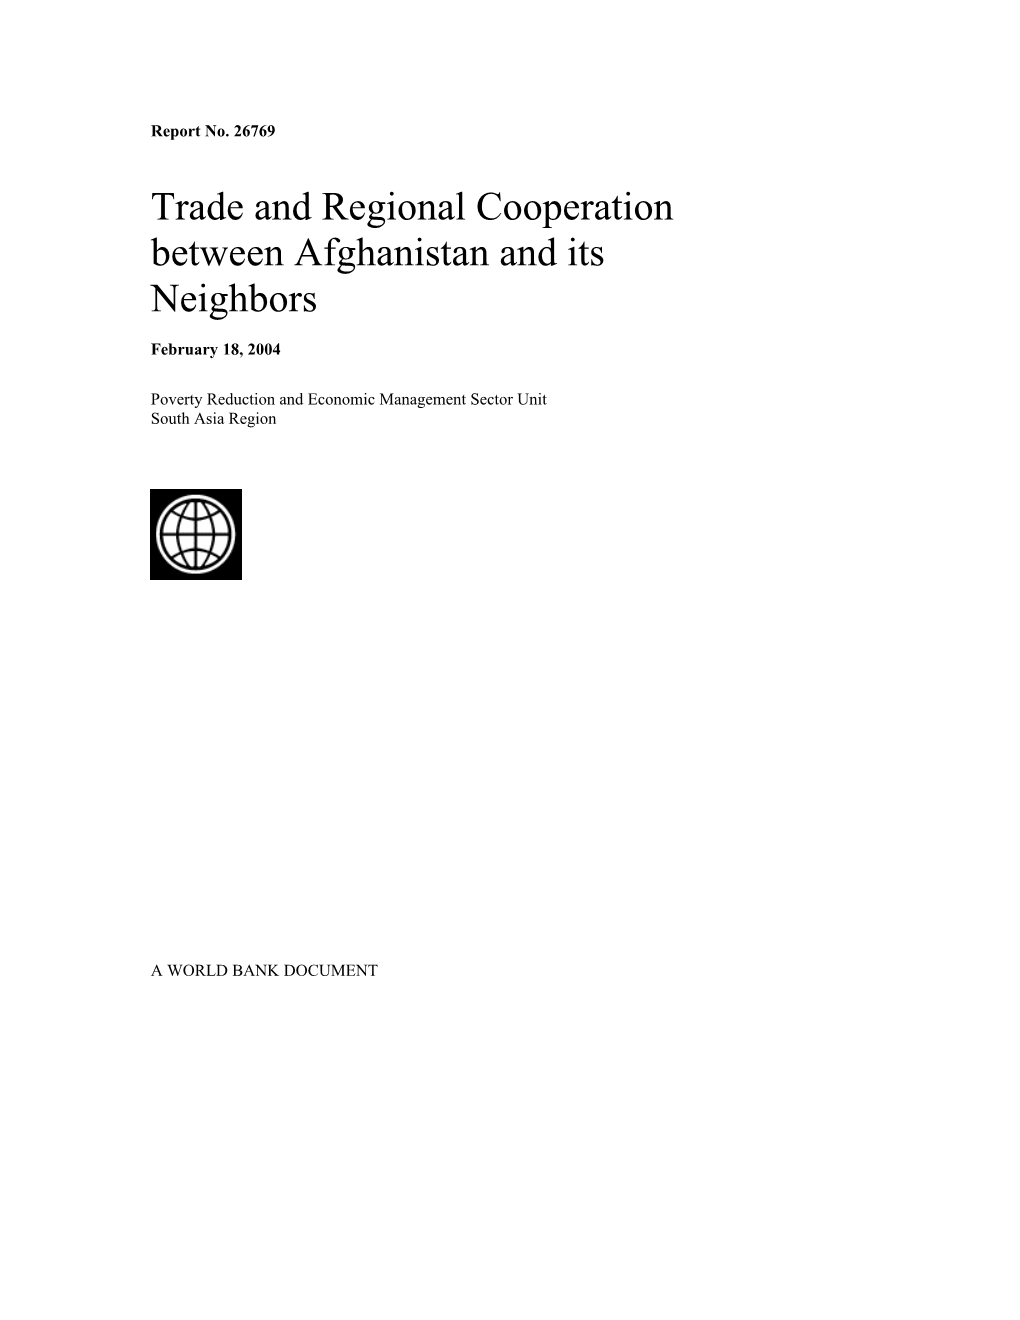 Trade and Regional Cooperation